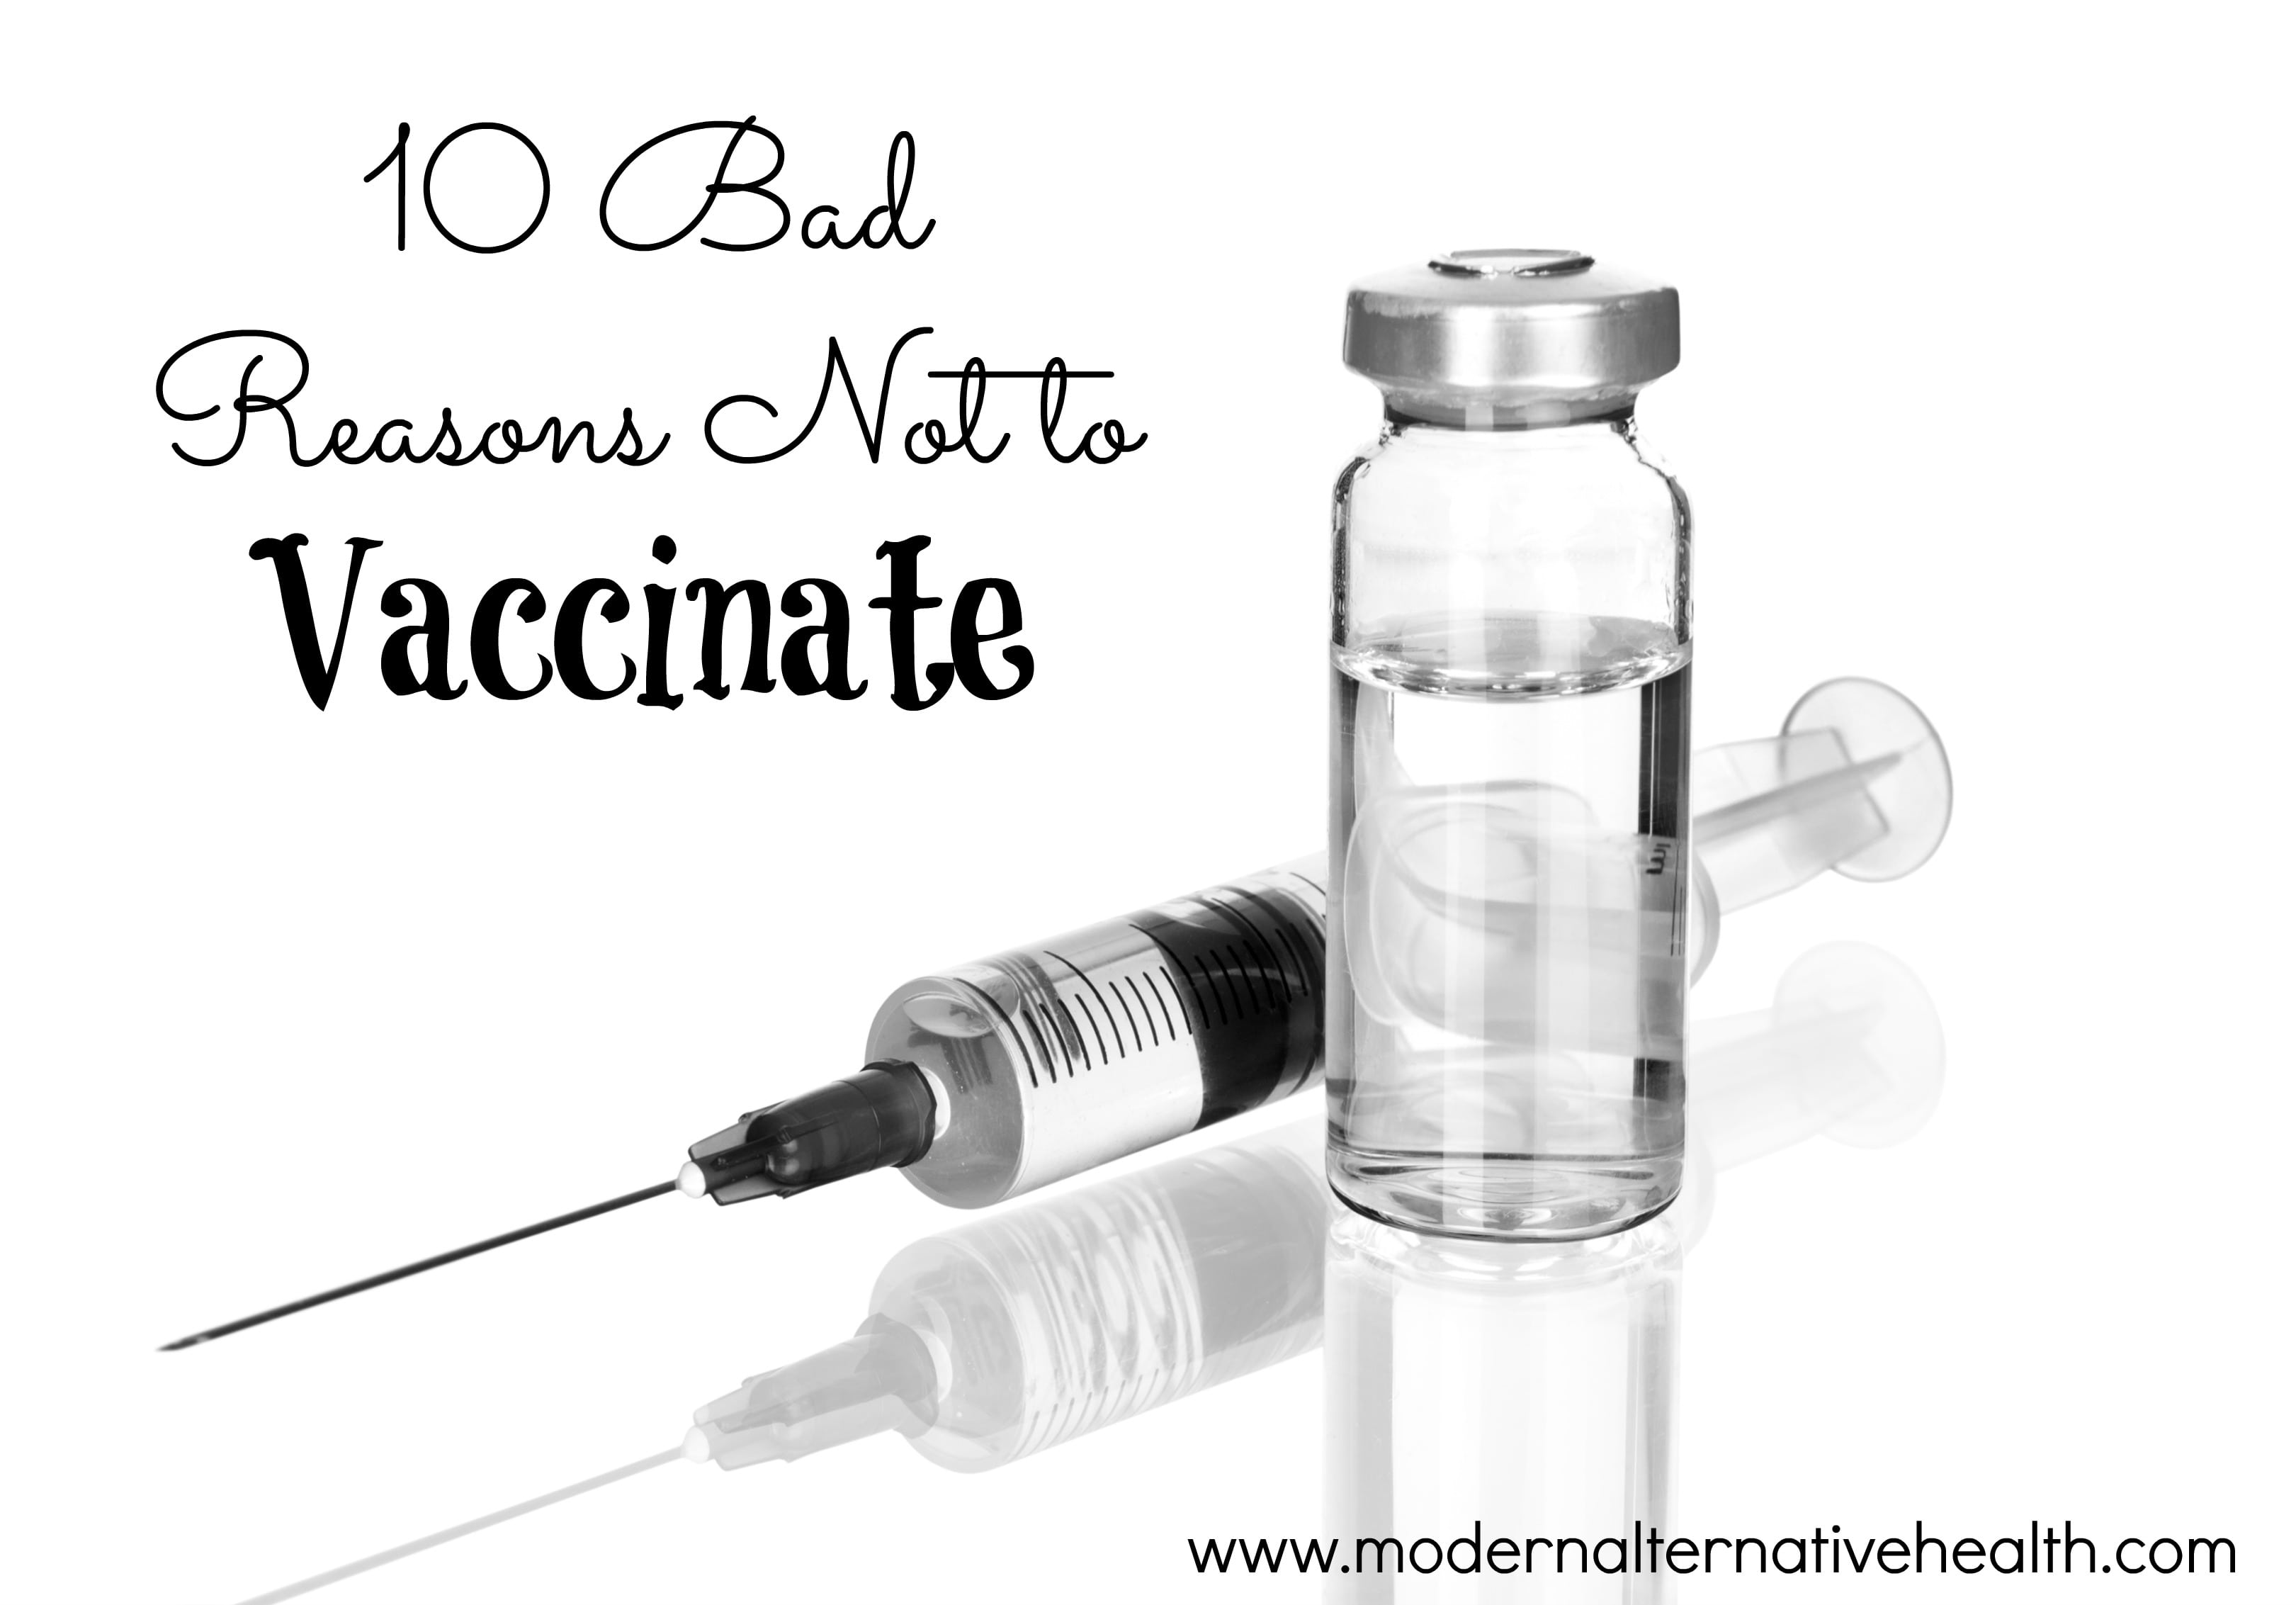 10 Bad Reasons Not to Vaccinate